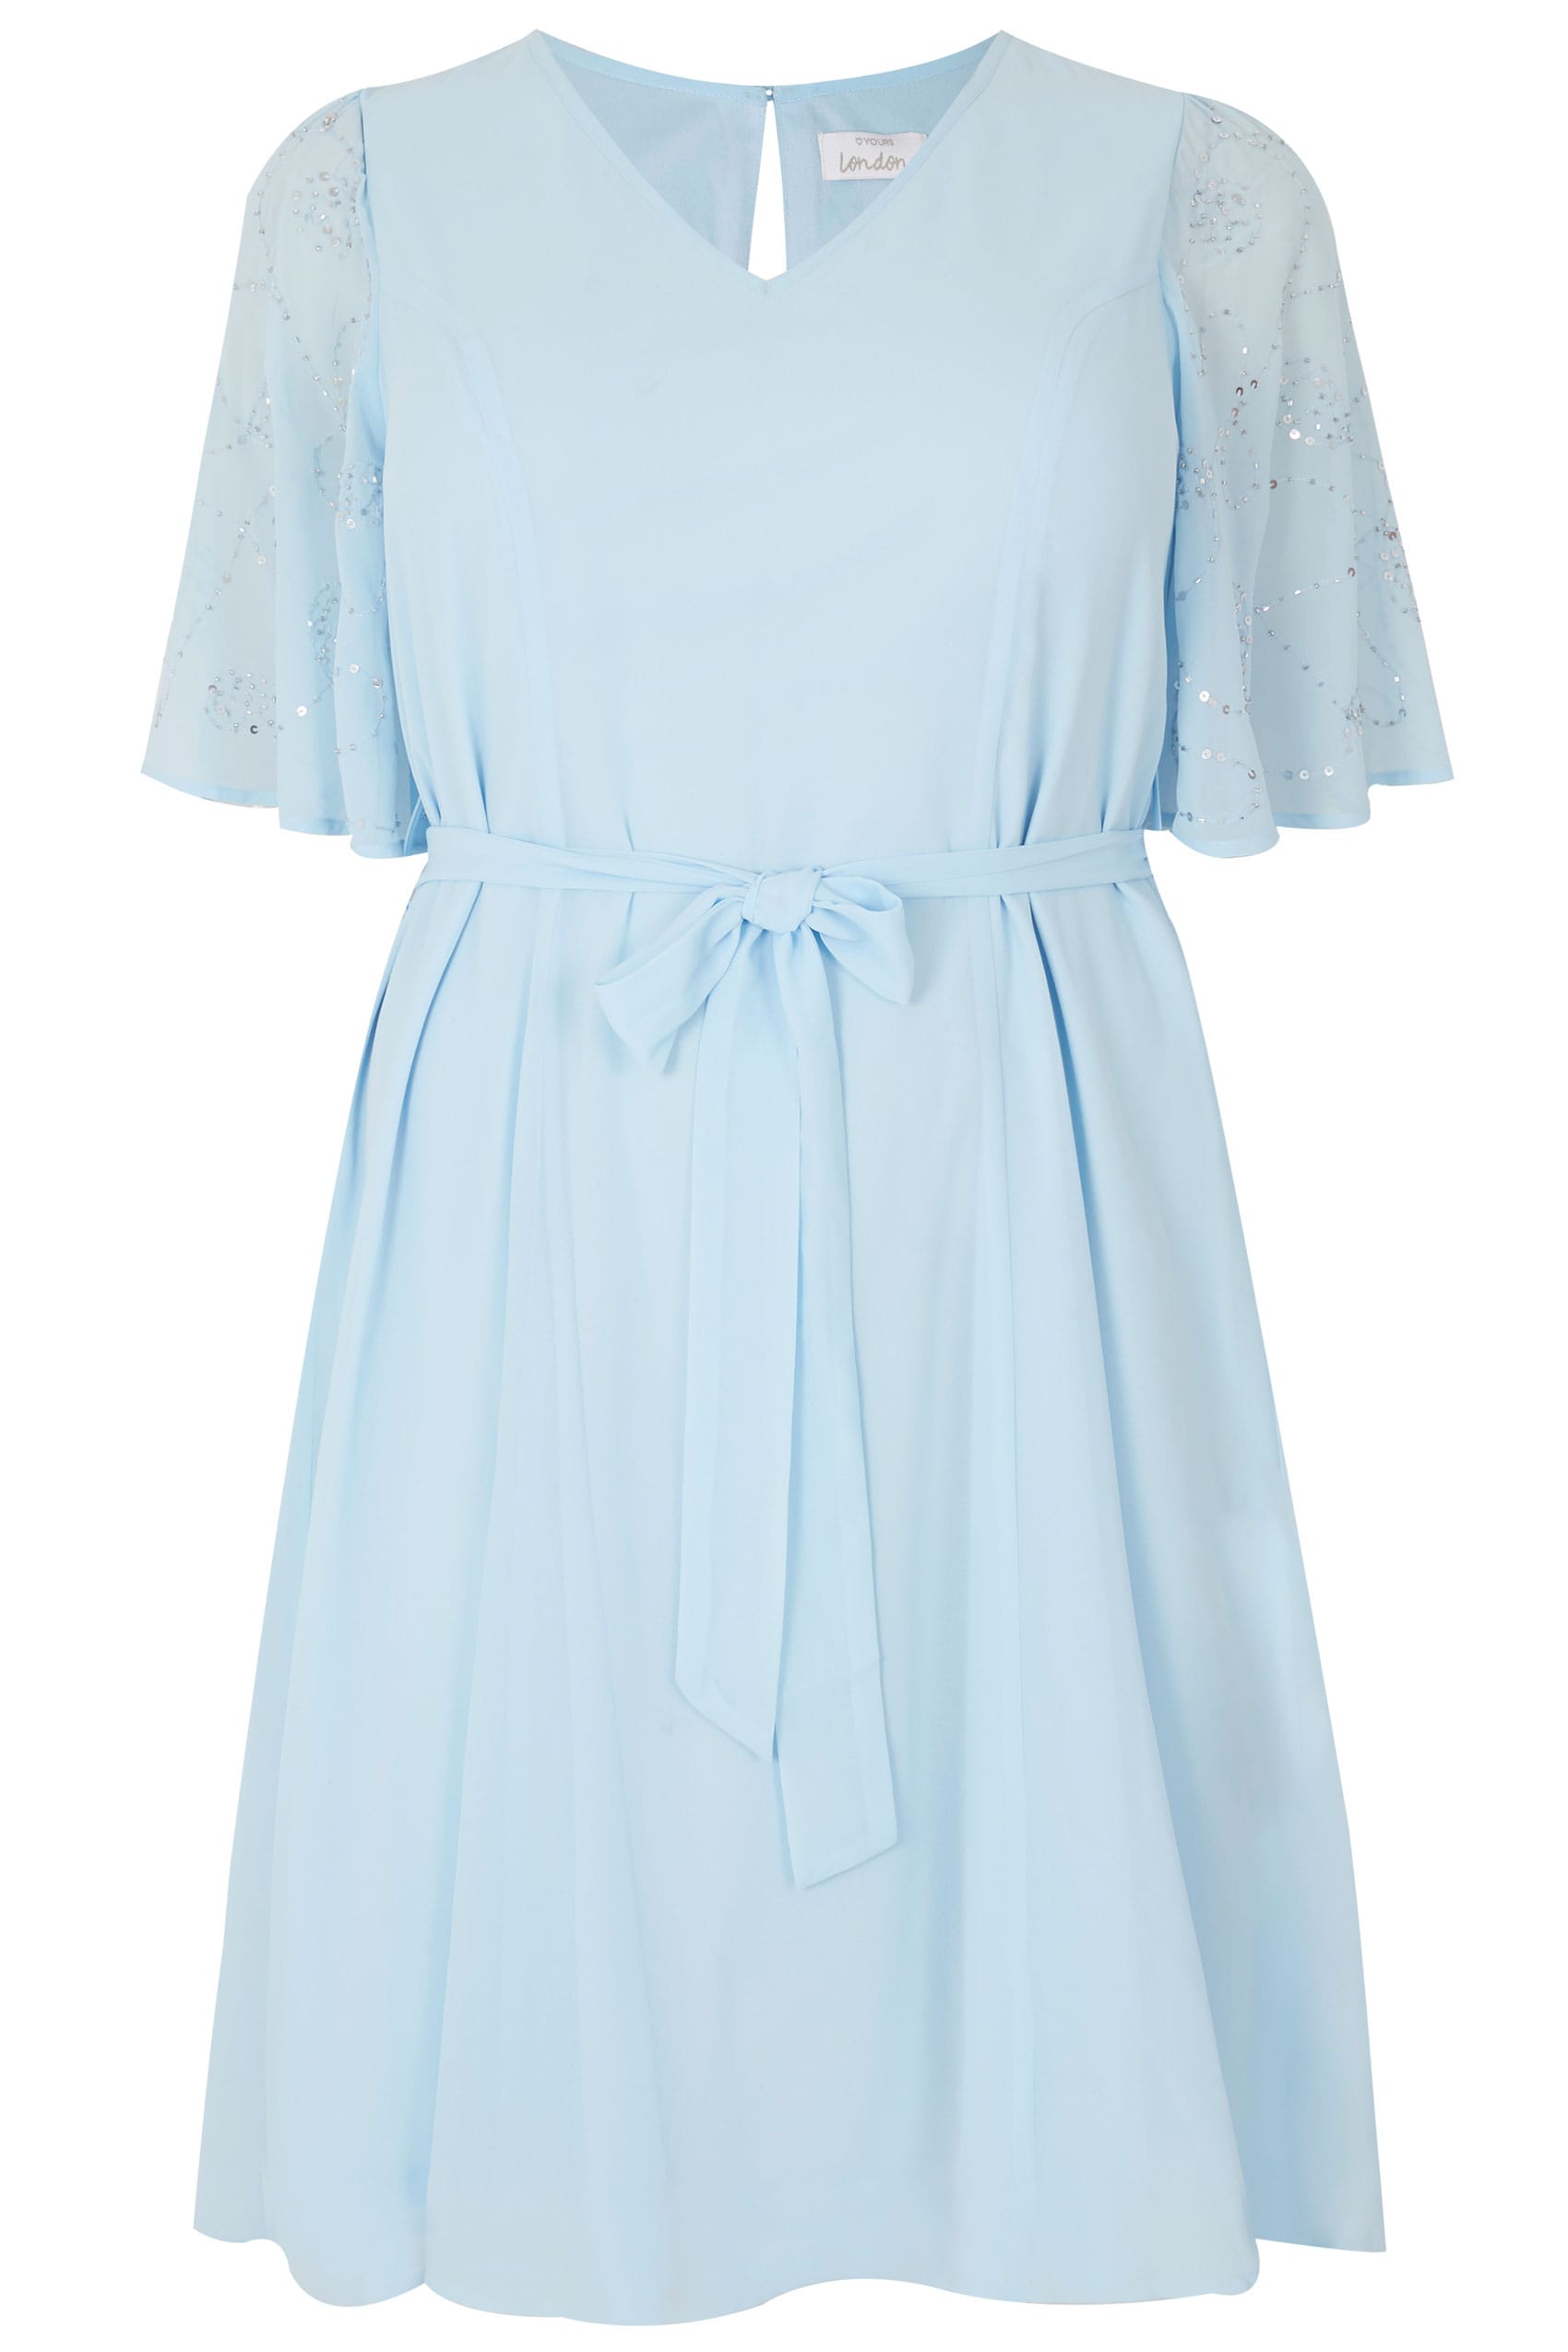 YOURS LONDON Light Blue Sequin Embellished Dress With Angel Sleeves ...